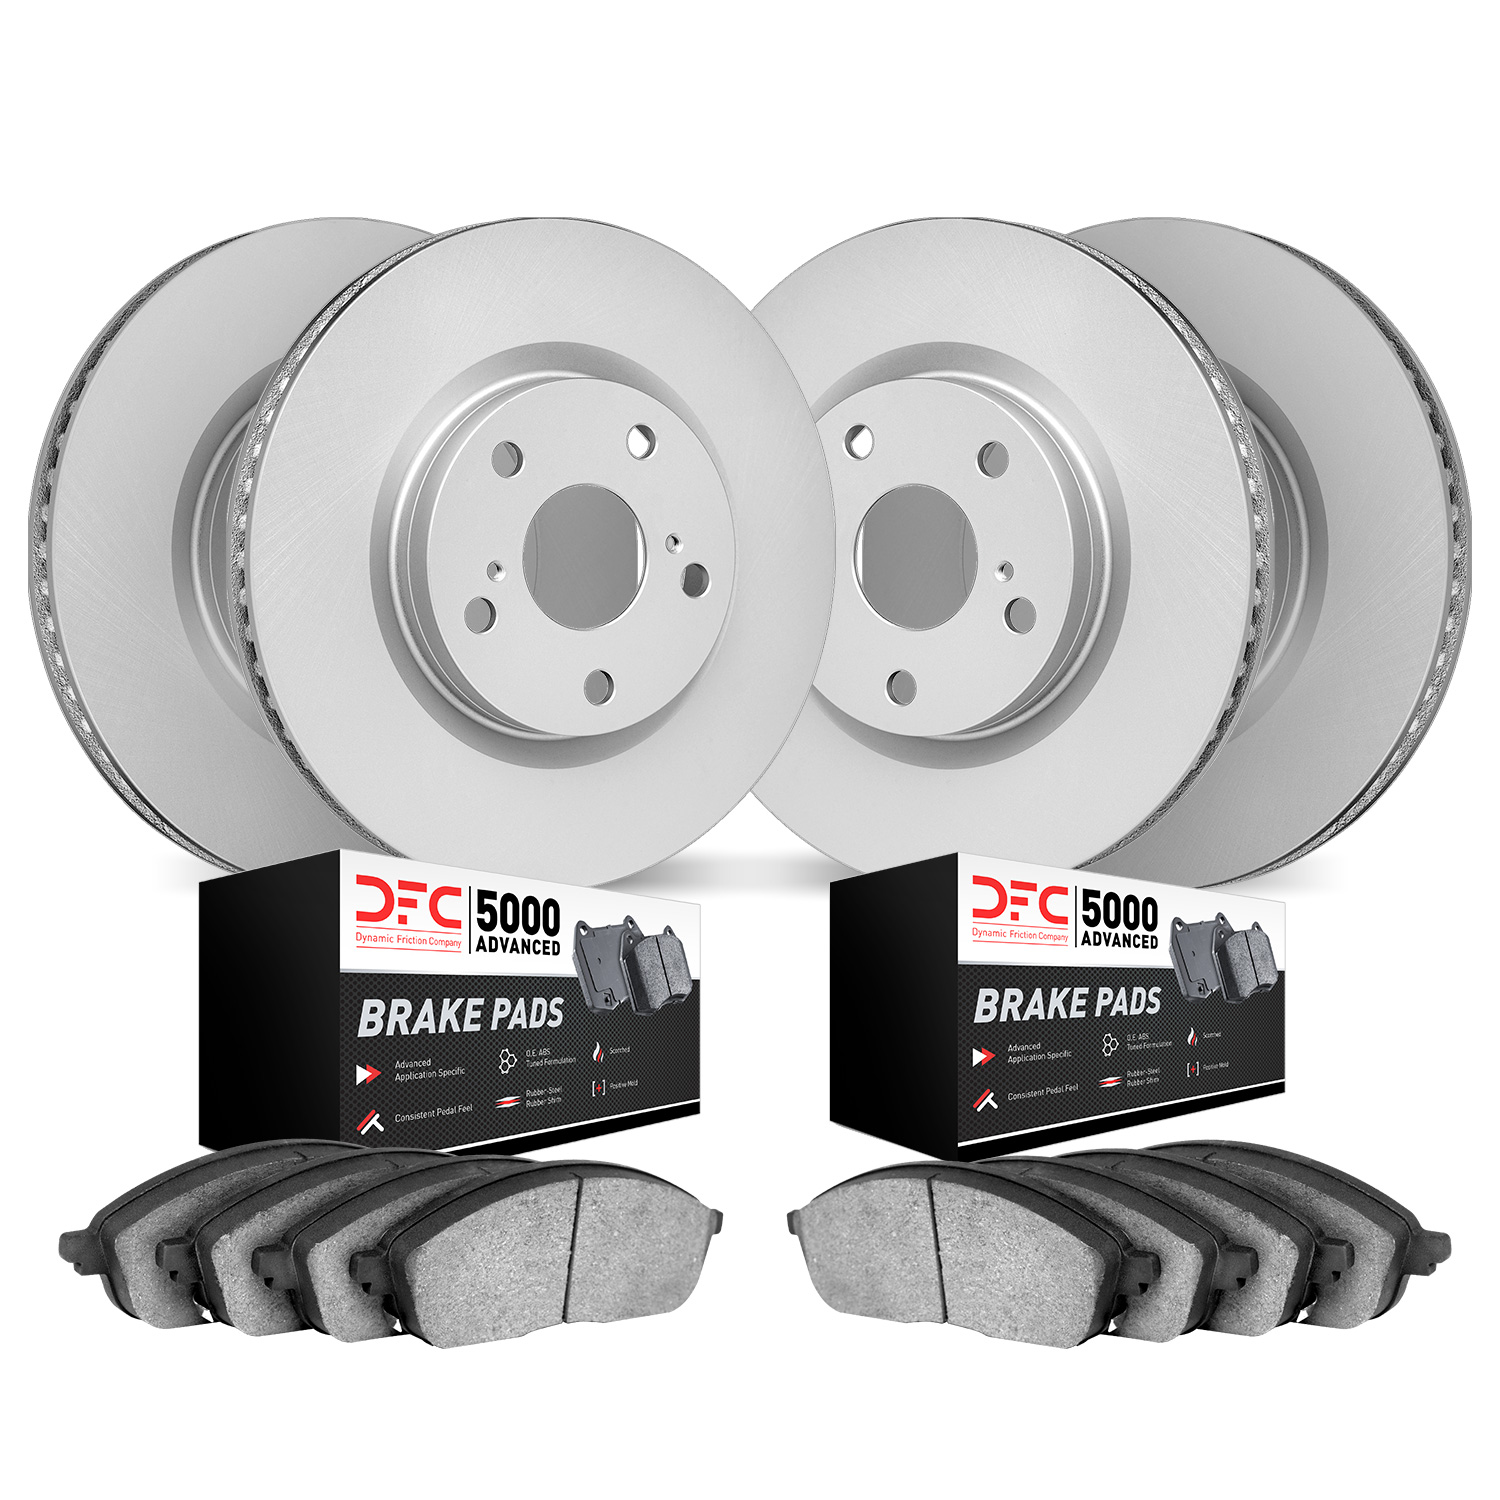 4504-54090 Geospec Brake Rotors w/5000 Advanced Brake Pads Kit, 2013-2014 Ford/Lincoln/Mercury/Mazda, Position: Front and Rear